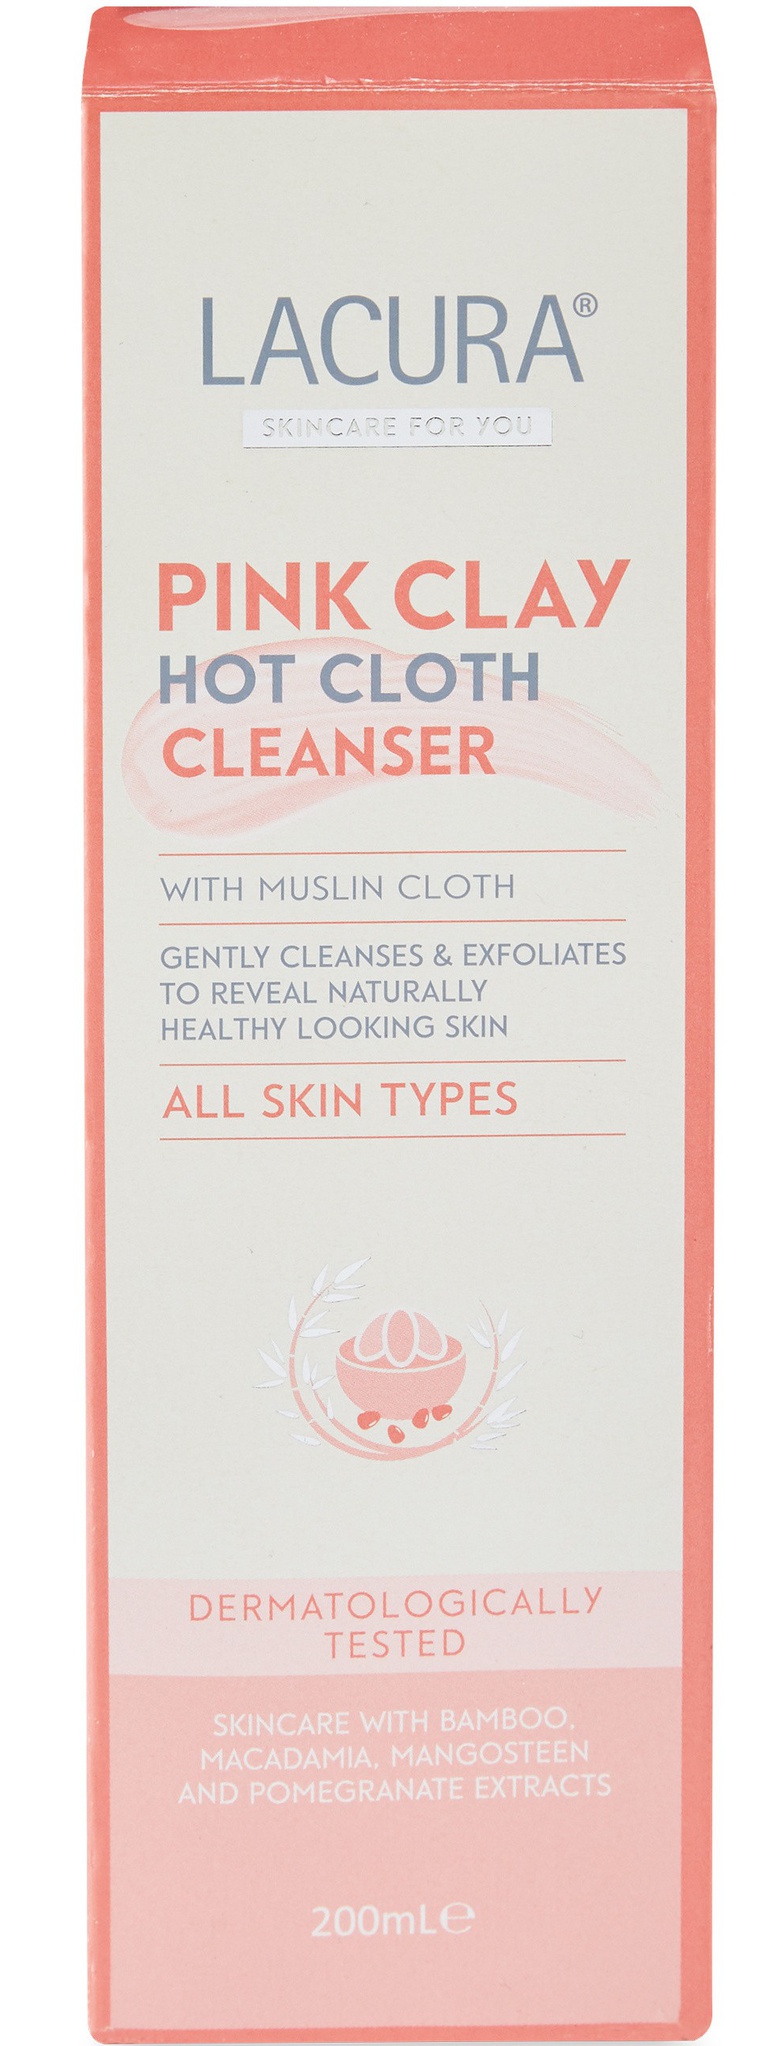 LACURA Pink Clay Hot Cloth Cleanser